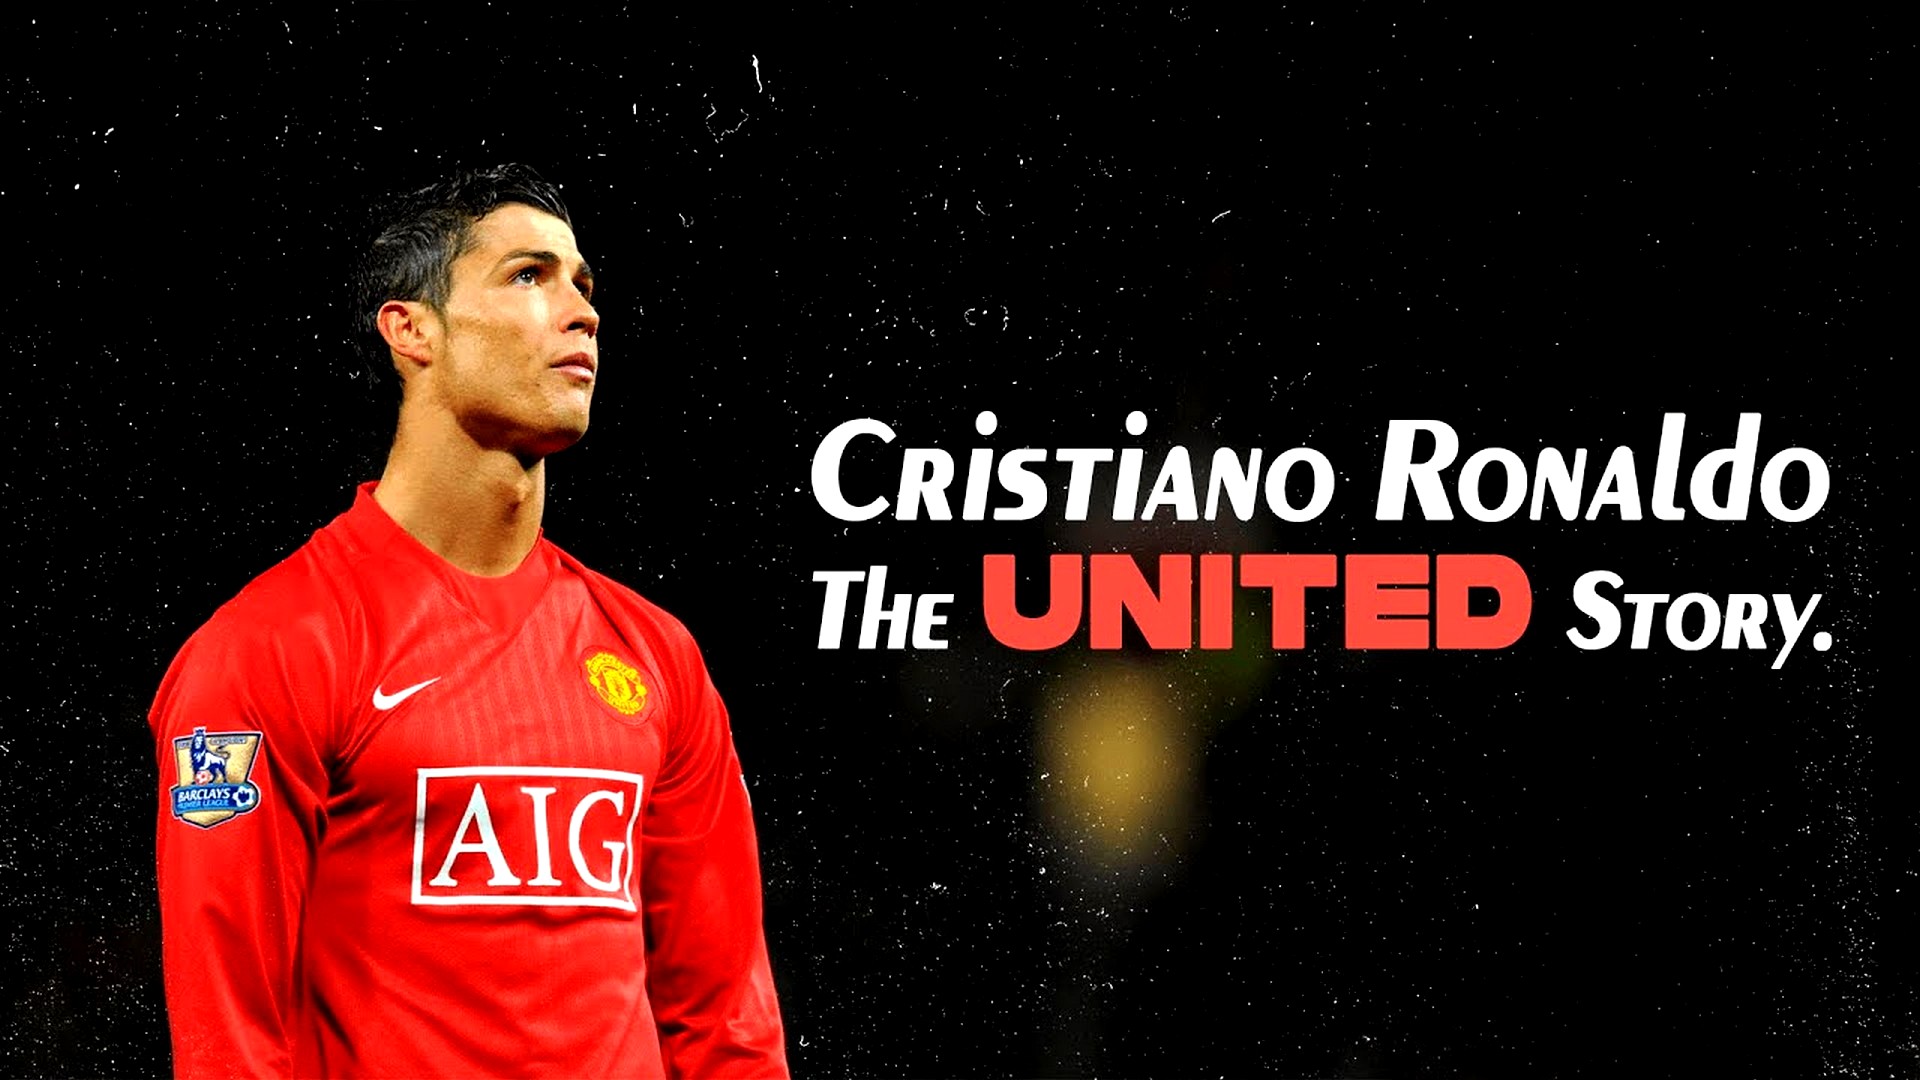 HD Desktop Wallpaper Cristiano Ronaldo Manchester United With high-resolution 1920X1080 pixel. You can use this wallpaper for your Desktop Computers, Mac Screensavers, Windows Backgrounds, iPhone Wallpapers, Tablet or Android Lock screen and another Mobile device